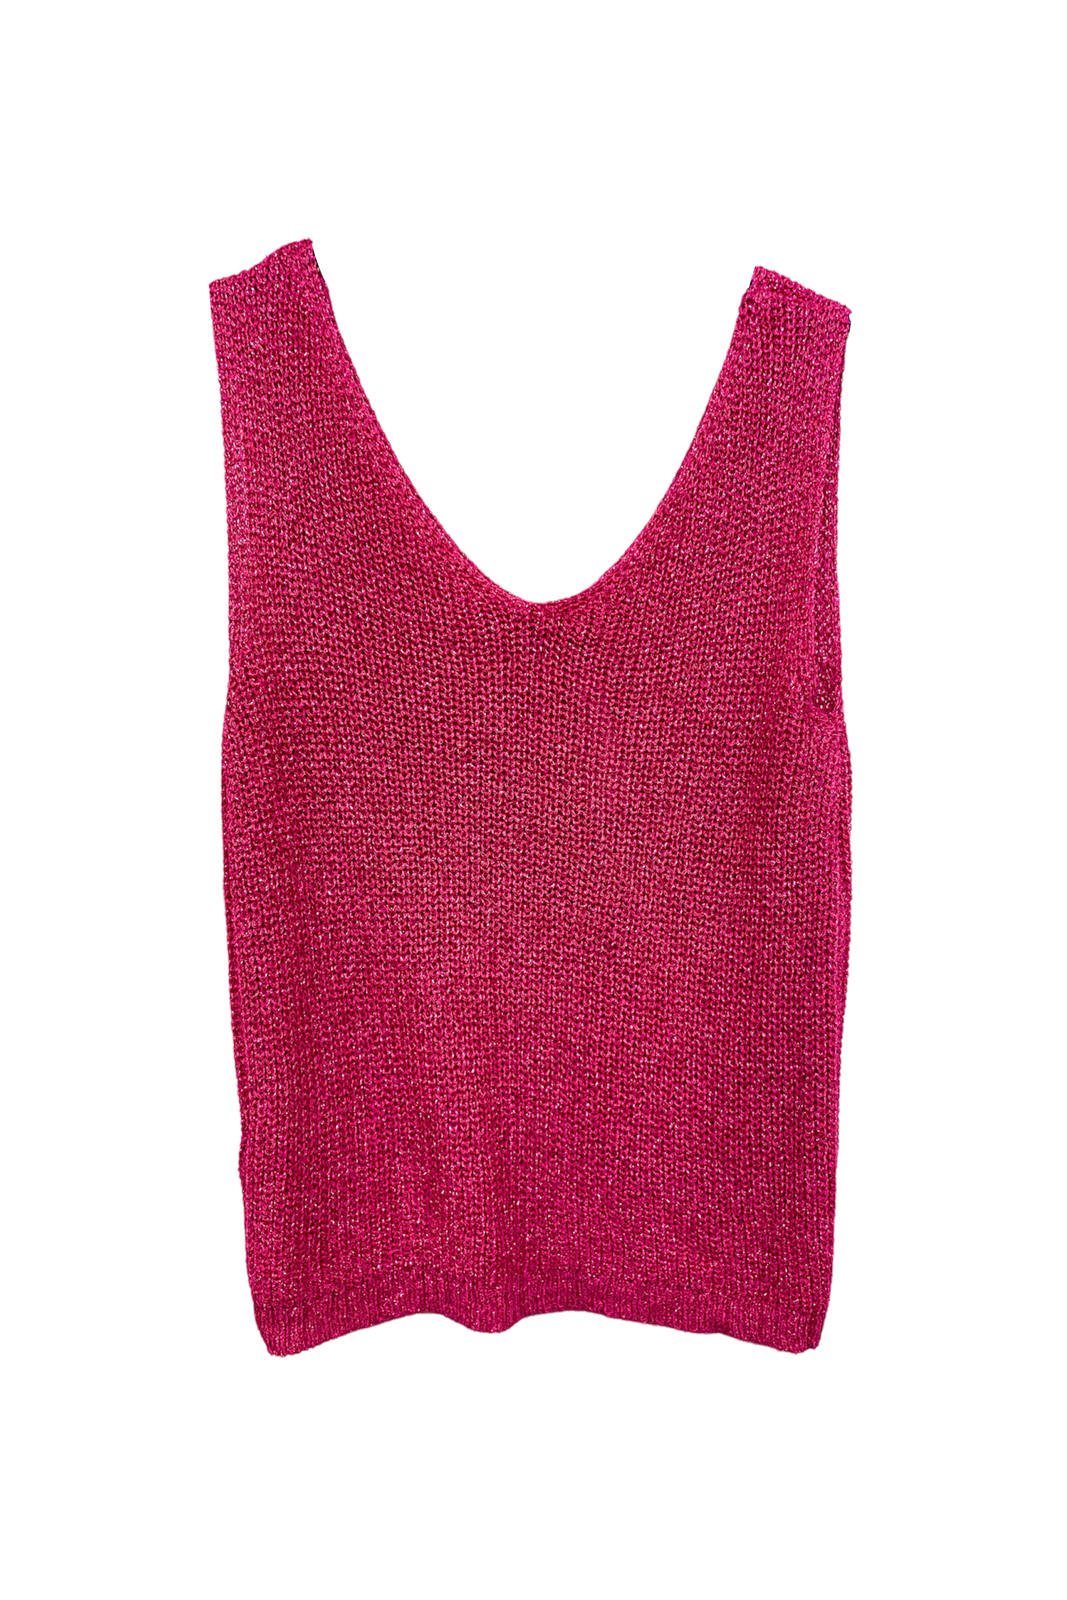 Free for Humanity Glitter Top - Pink-Free for Humanity-Sophies.dk